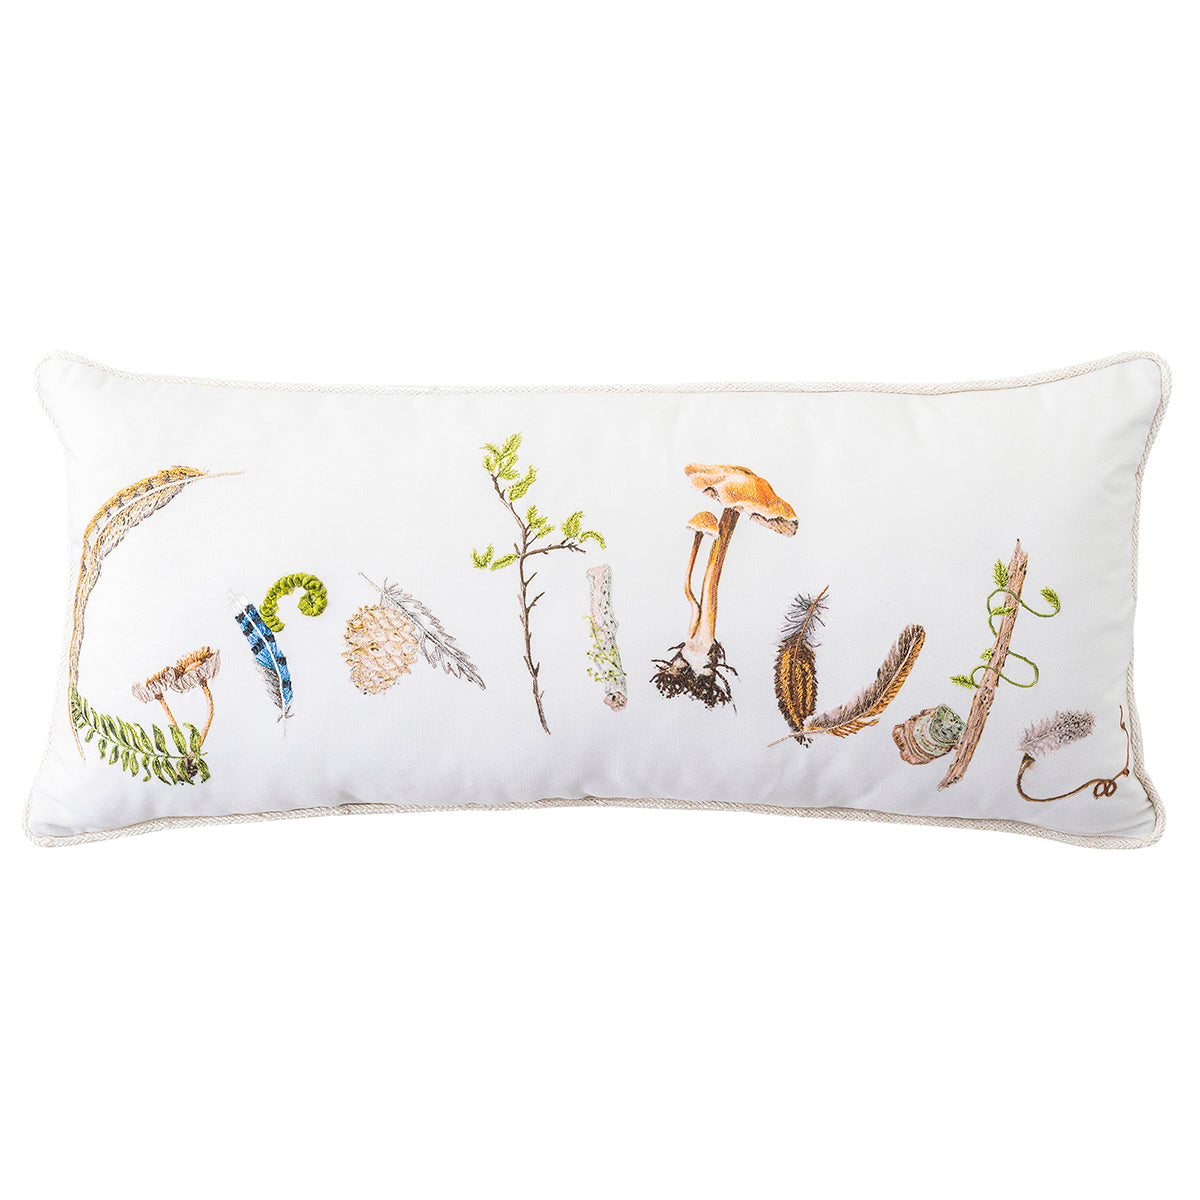 Featuring intricate embroidery to spell out one of our favorite sentiments of Gratitude, our new collection of Forest Walk pillows are beautifully printed in vibrant colors and decorated with found treasures from the forest floor. Stuffed with 10% down and 90% feather fill.